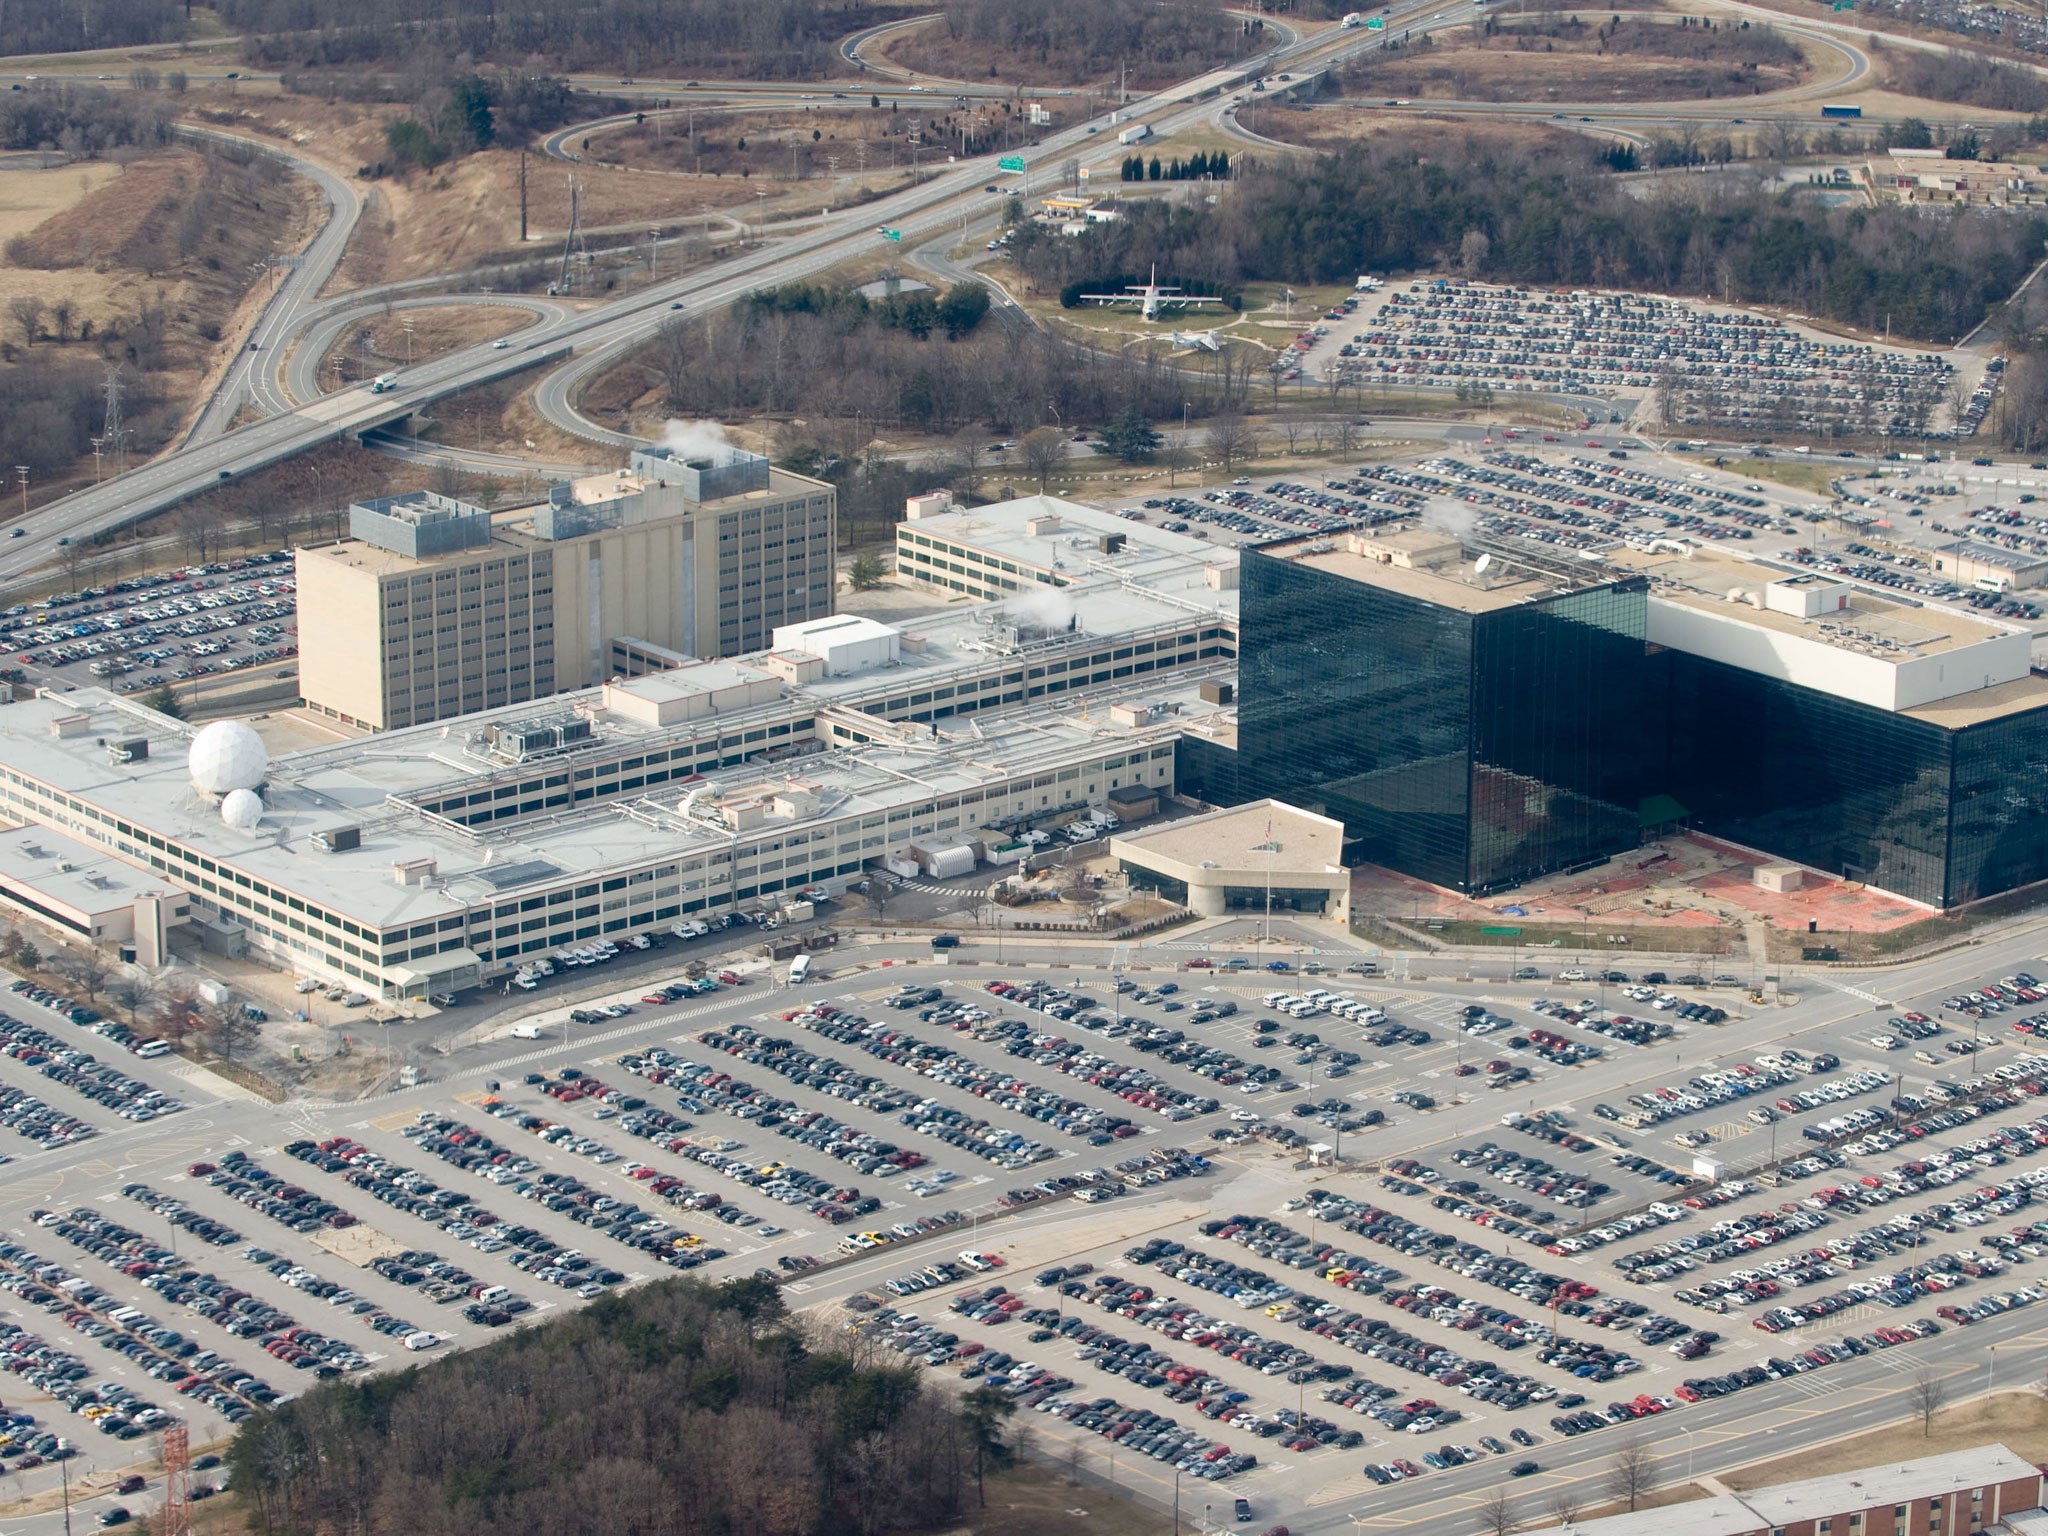 The NSA in Fort Meade, Maryland.